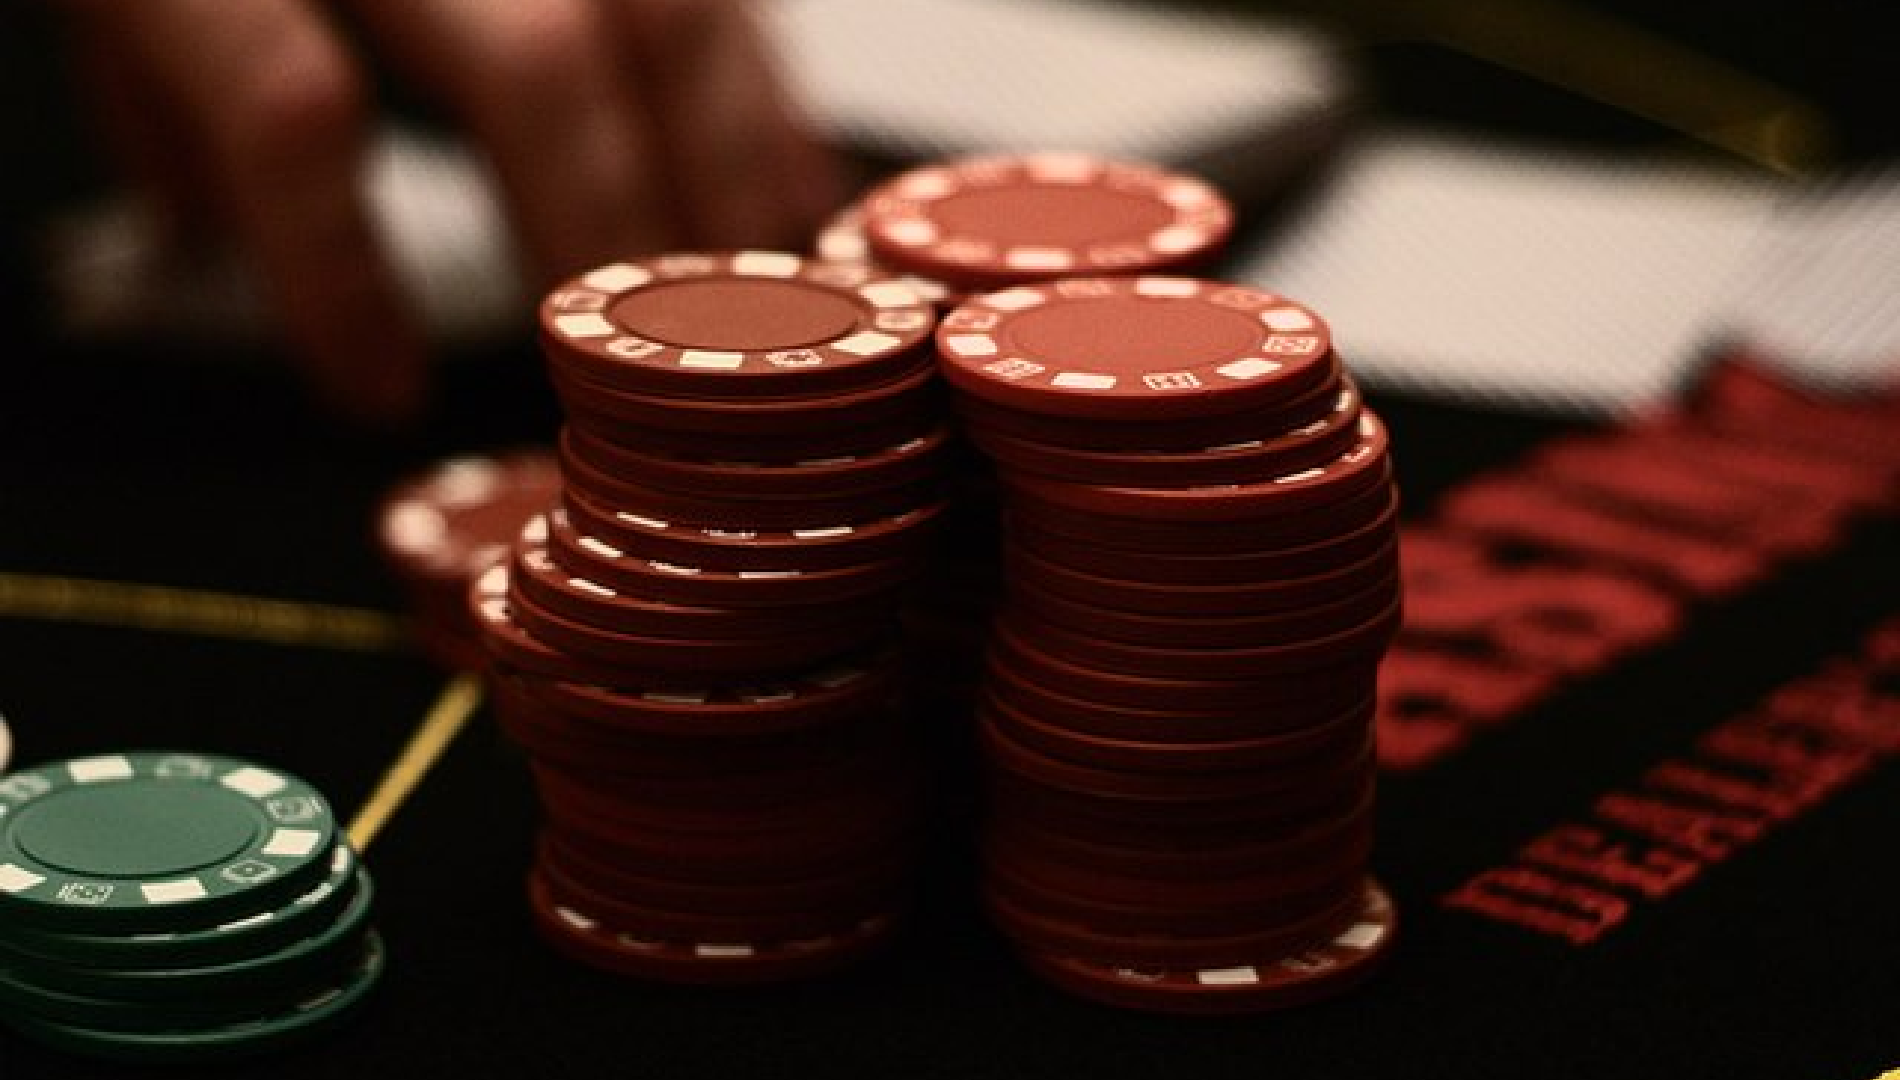 According to a study, over 80% of adults in spain enjoy gambling for recreation